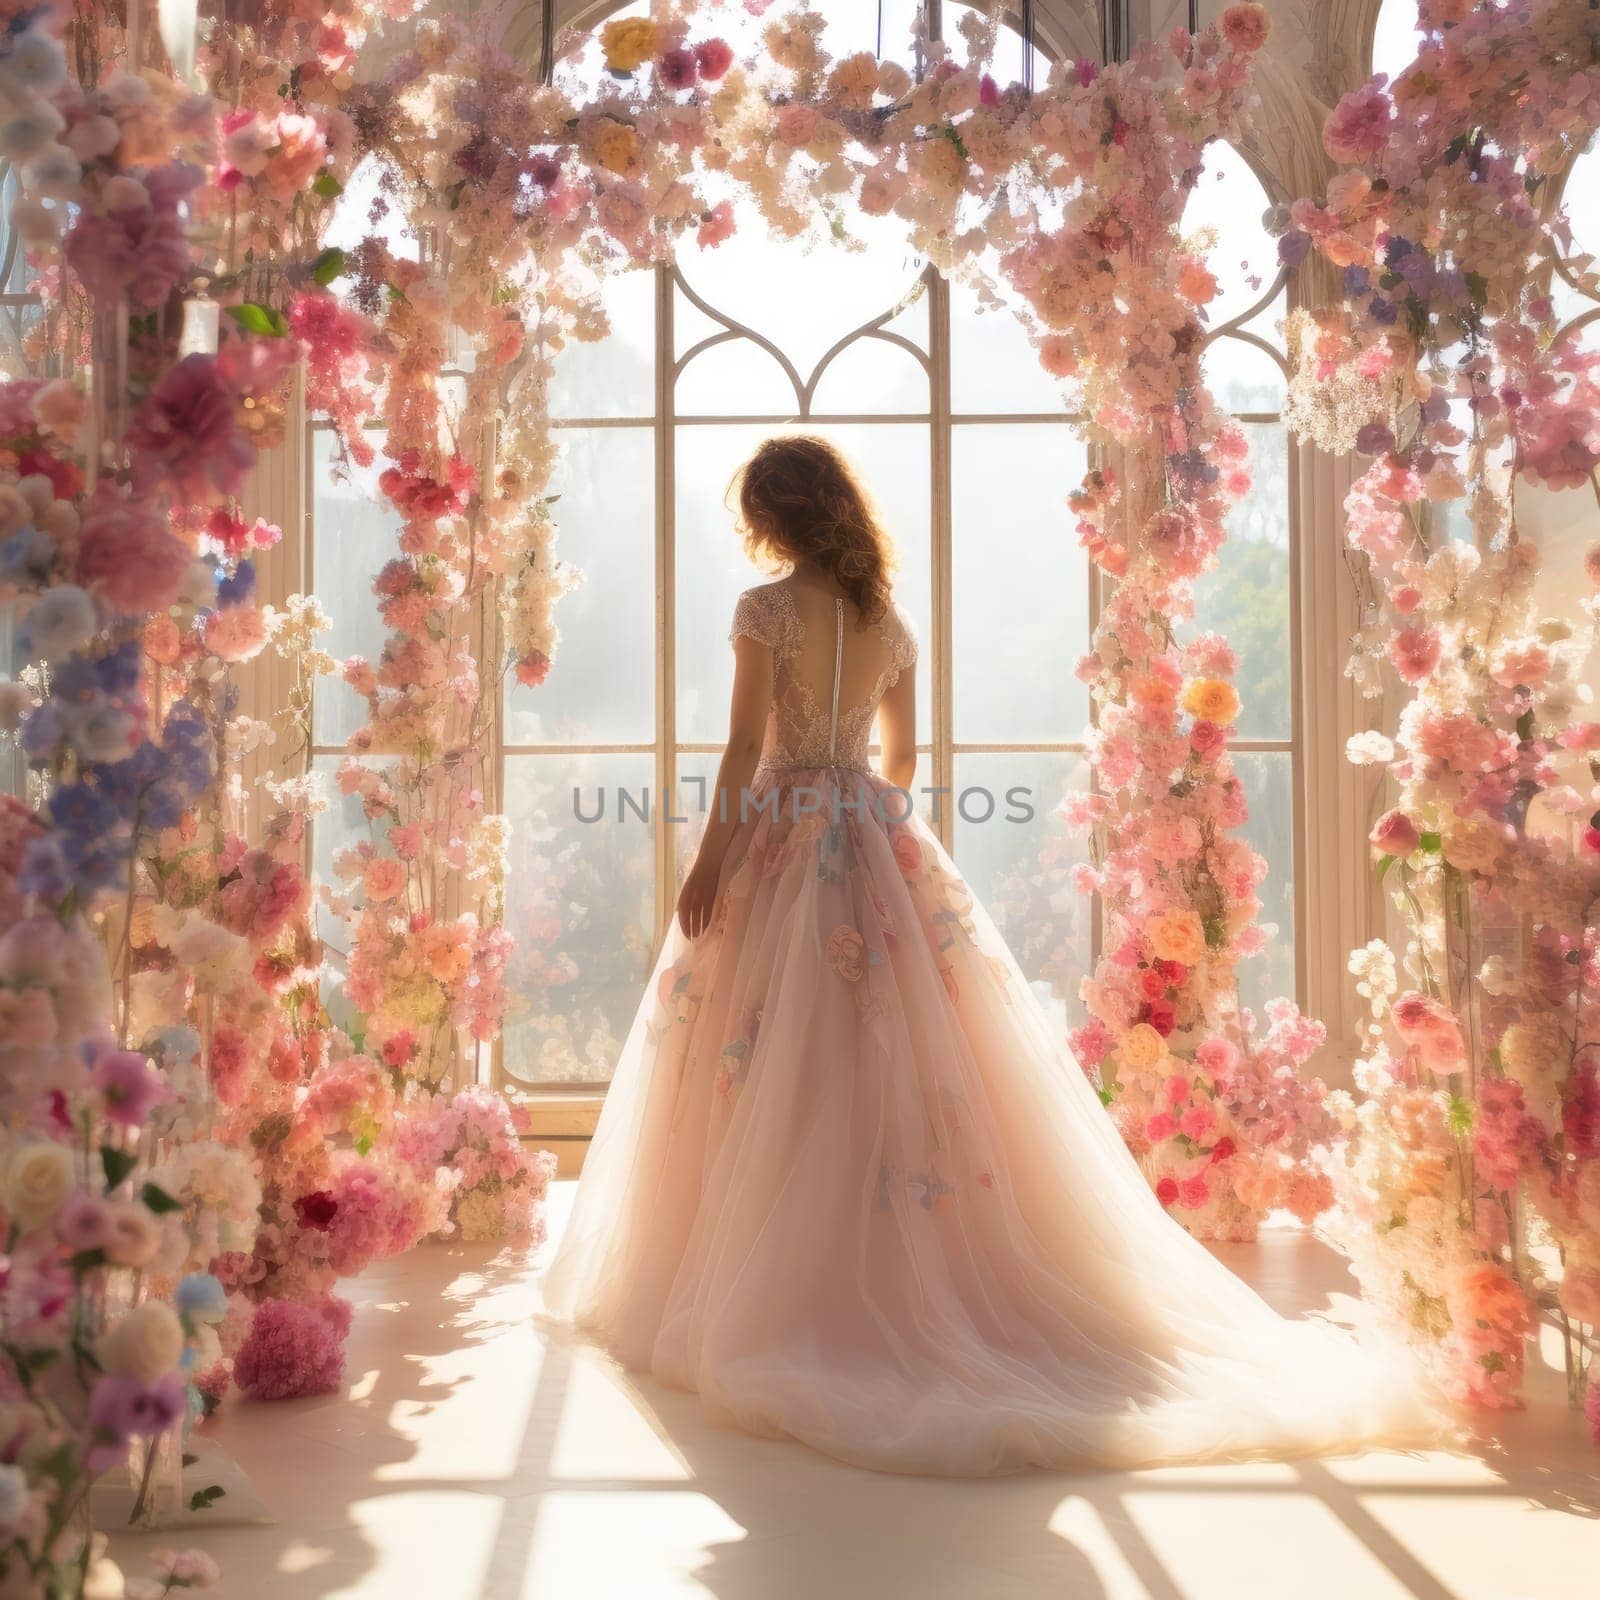 The bride at the perfect wedding. Wedding concept